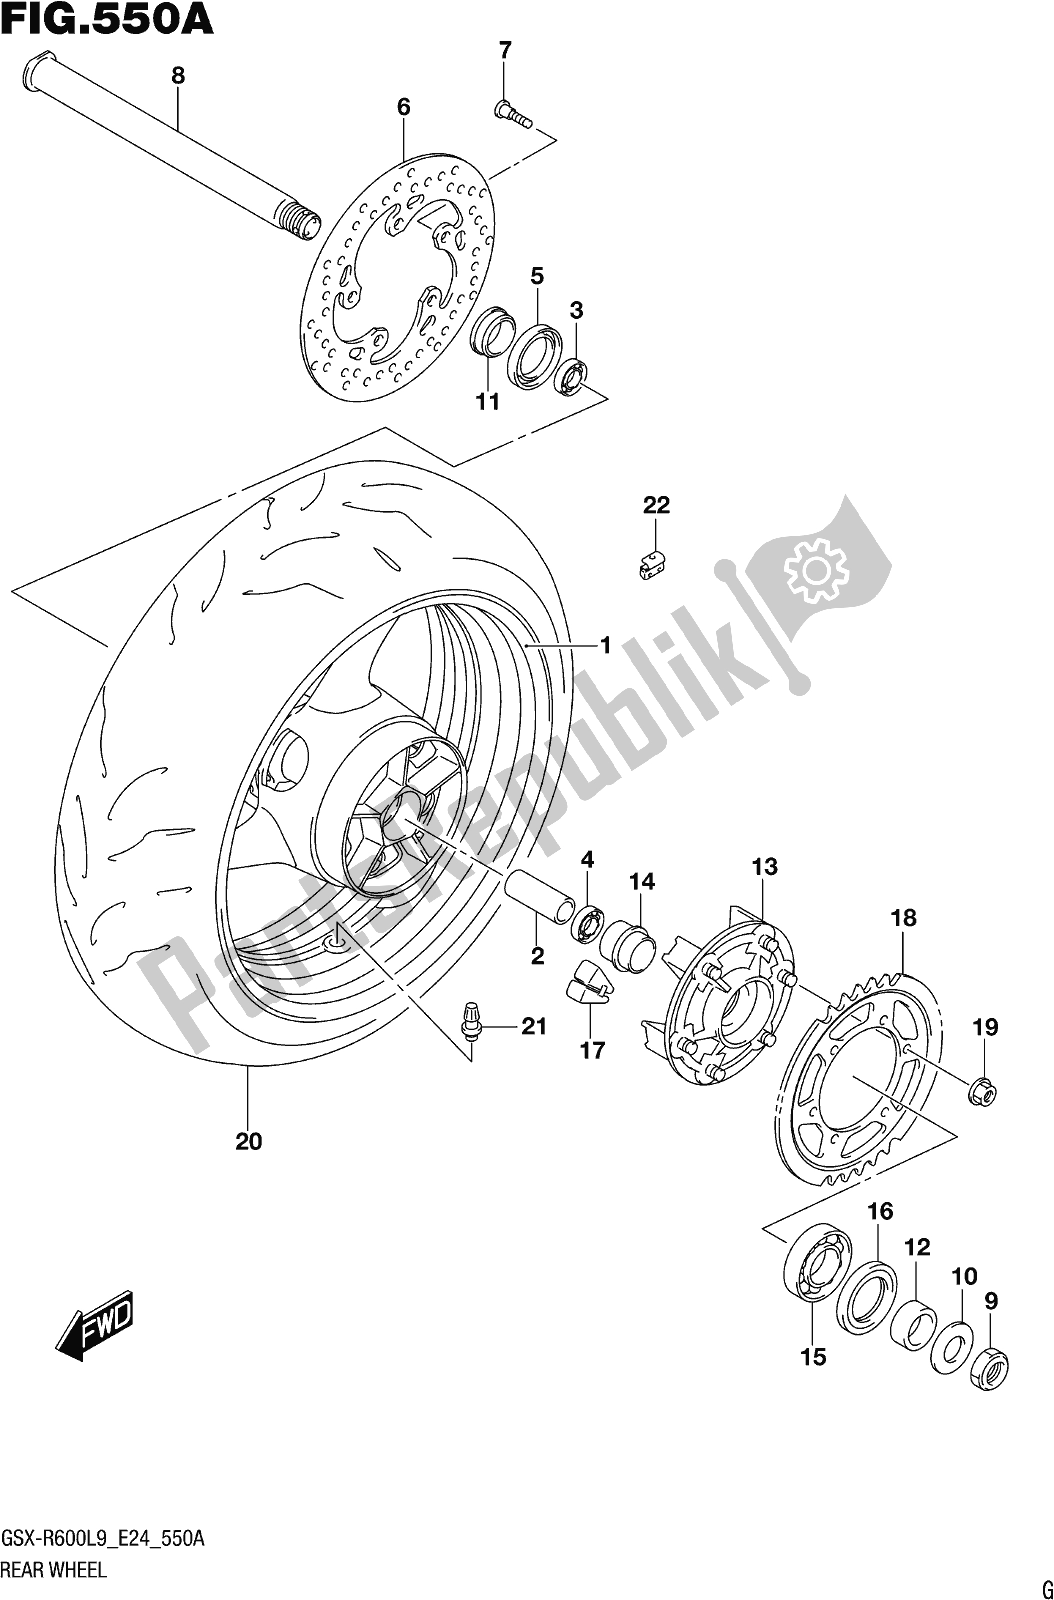 All parts for the Fig. 550a Rear Wheel of the Suzuki Gsx-r 600 2019